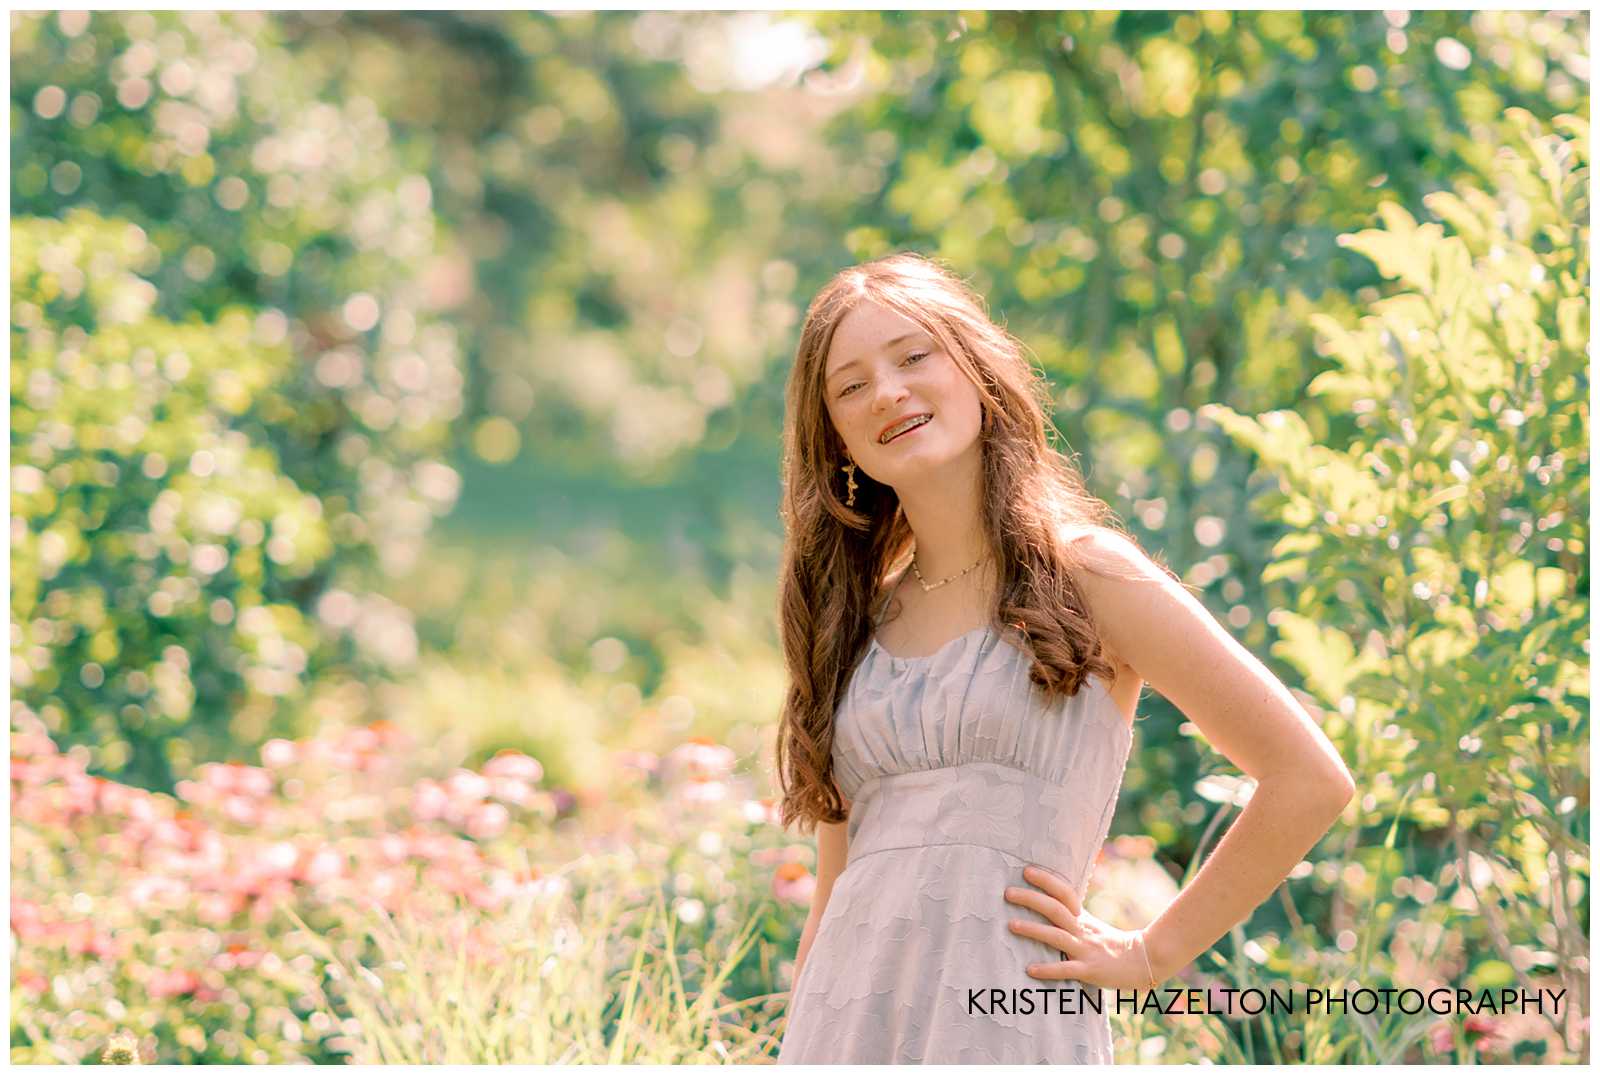 Summer Senior photos at Lilacia Park in Lombard IL; girl wearing a blue sundress in a garden of pink flowers